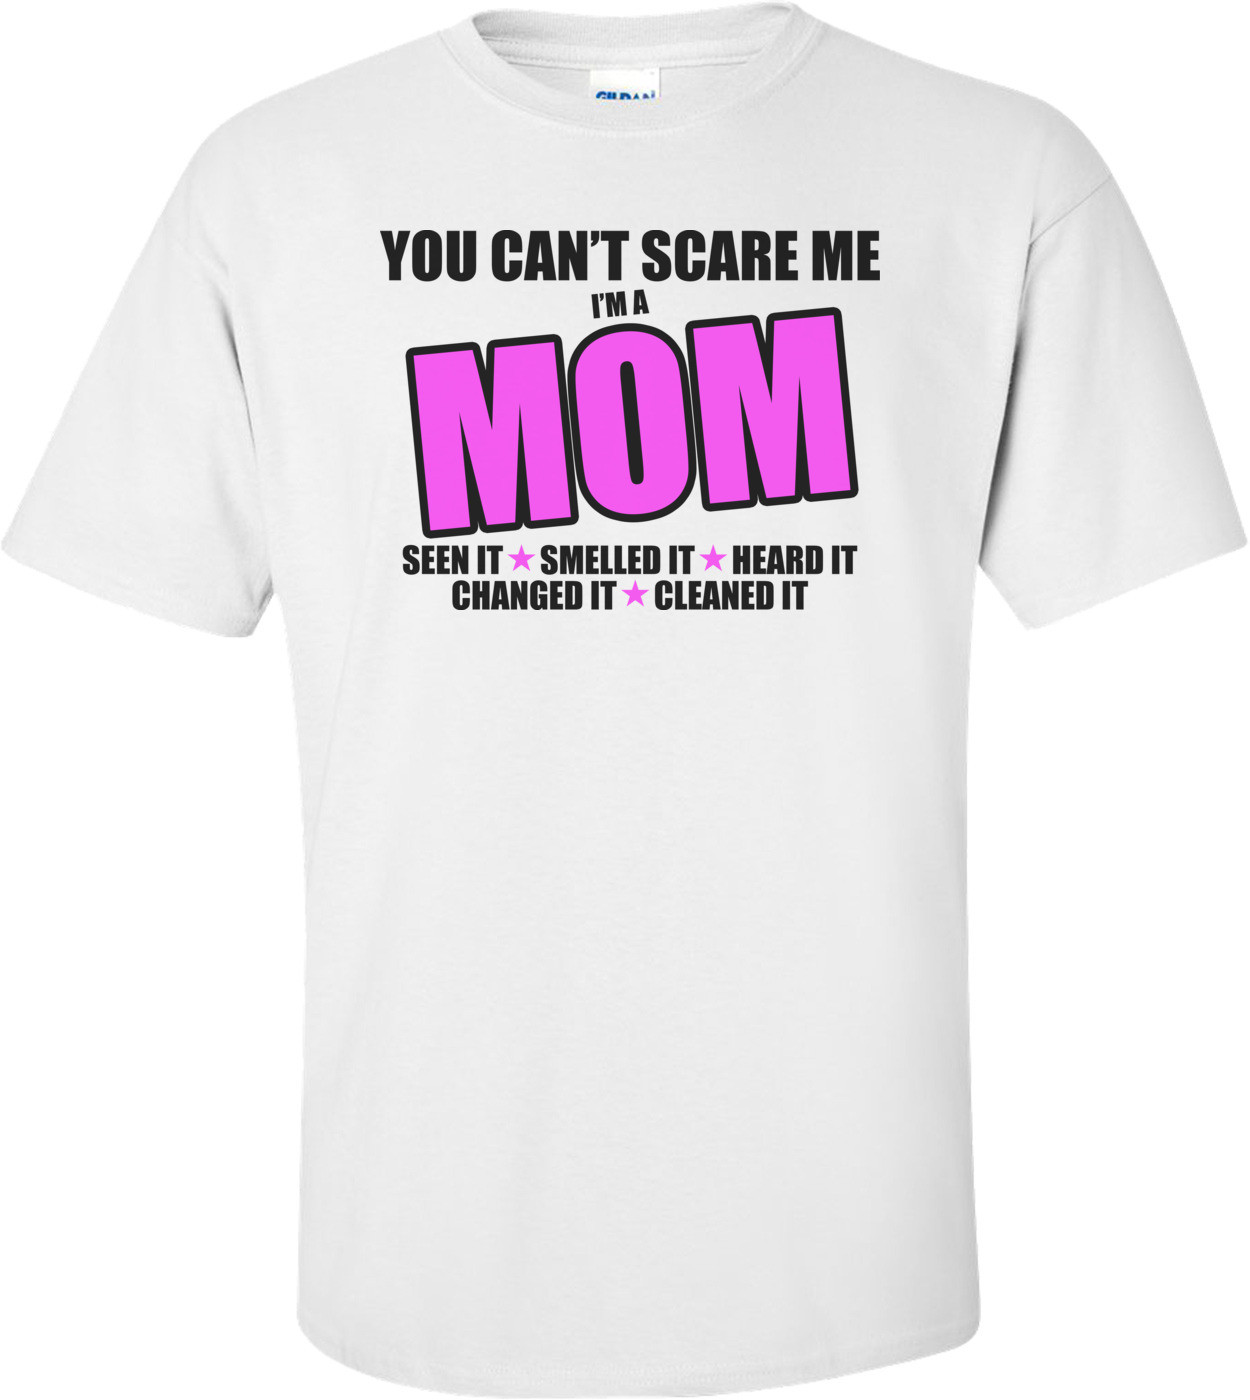 You Can't Scare Me, I'm A Mom Shirt